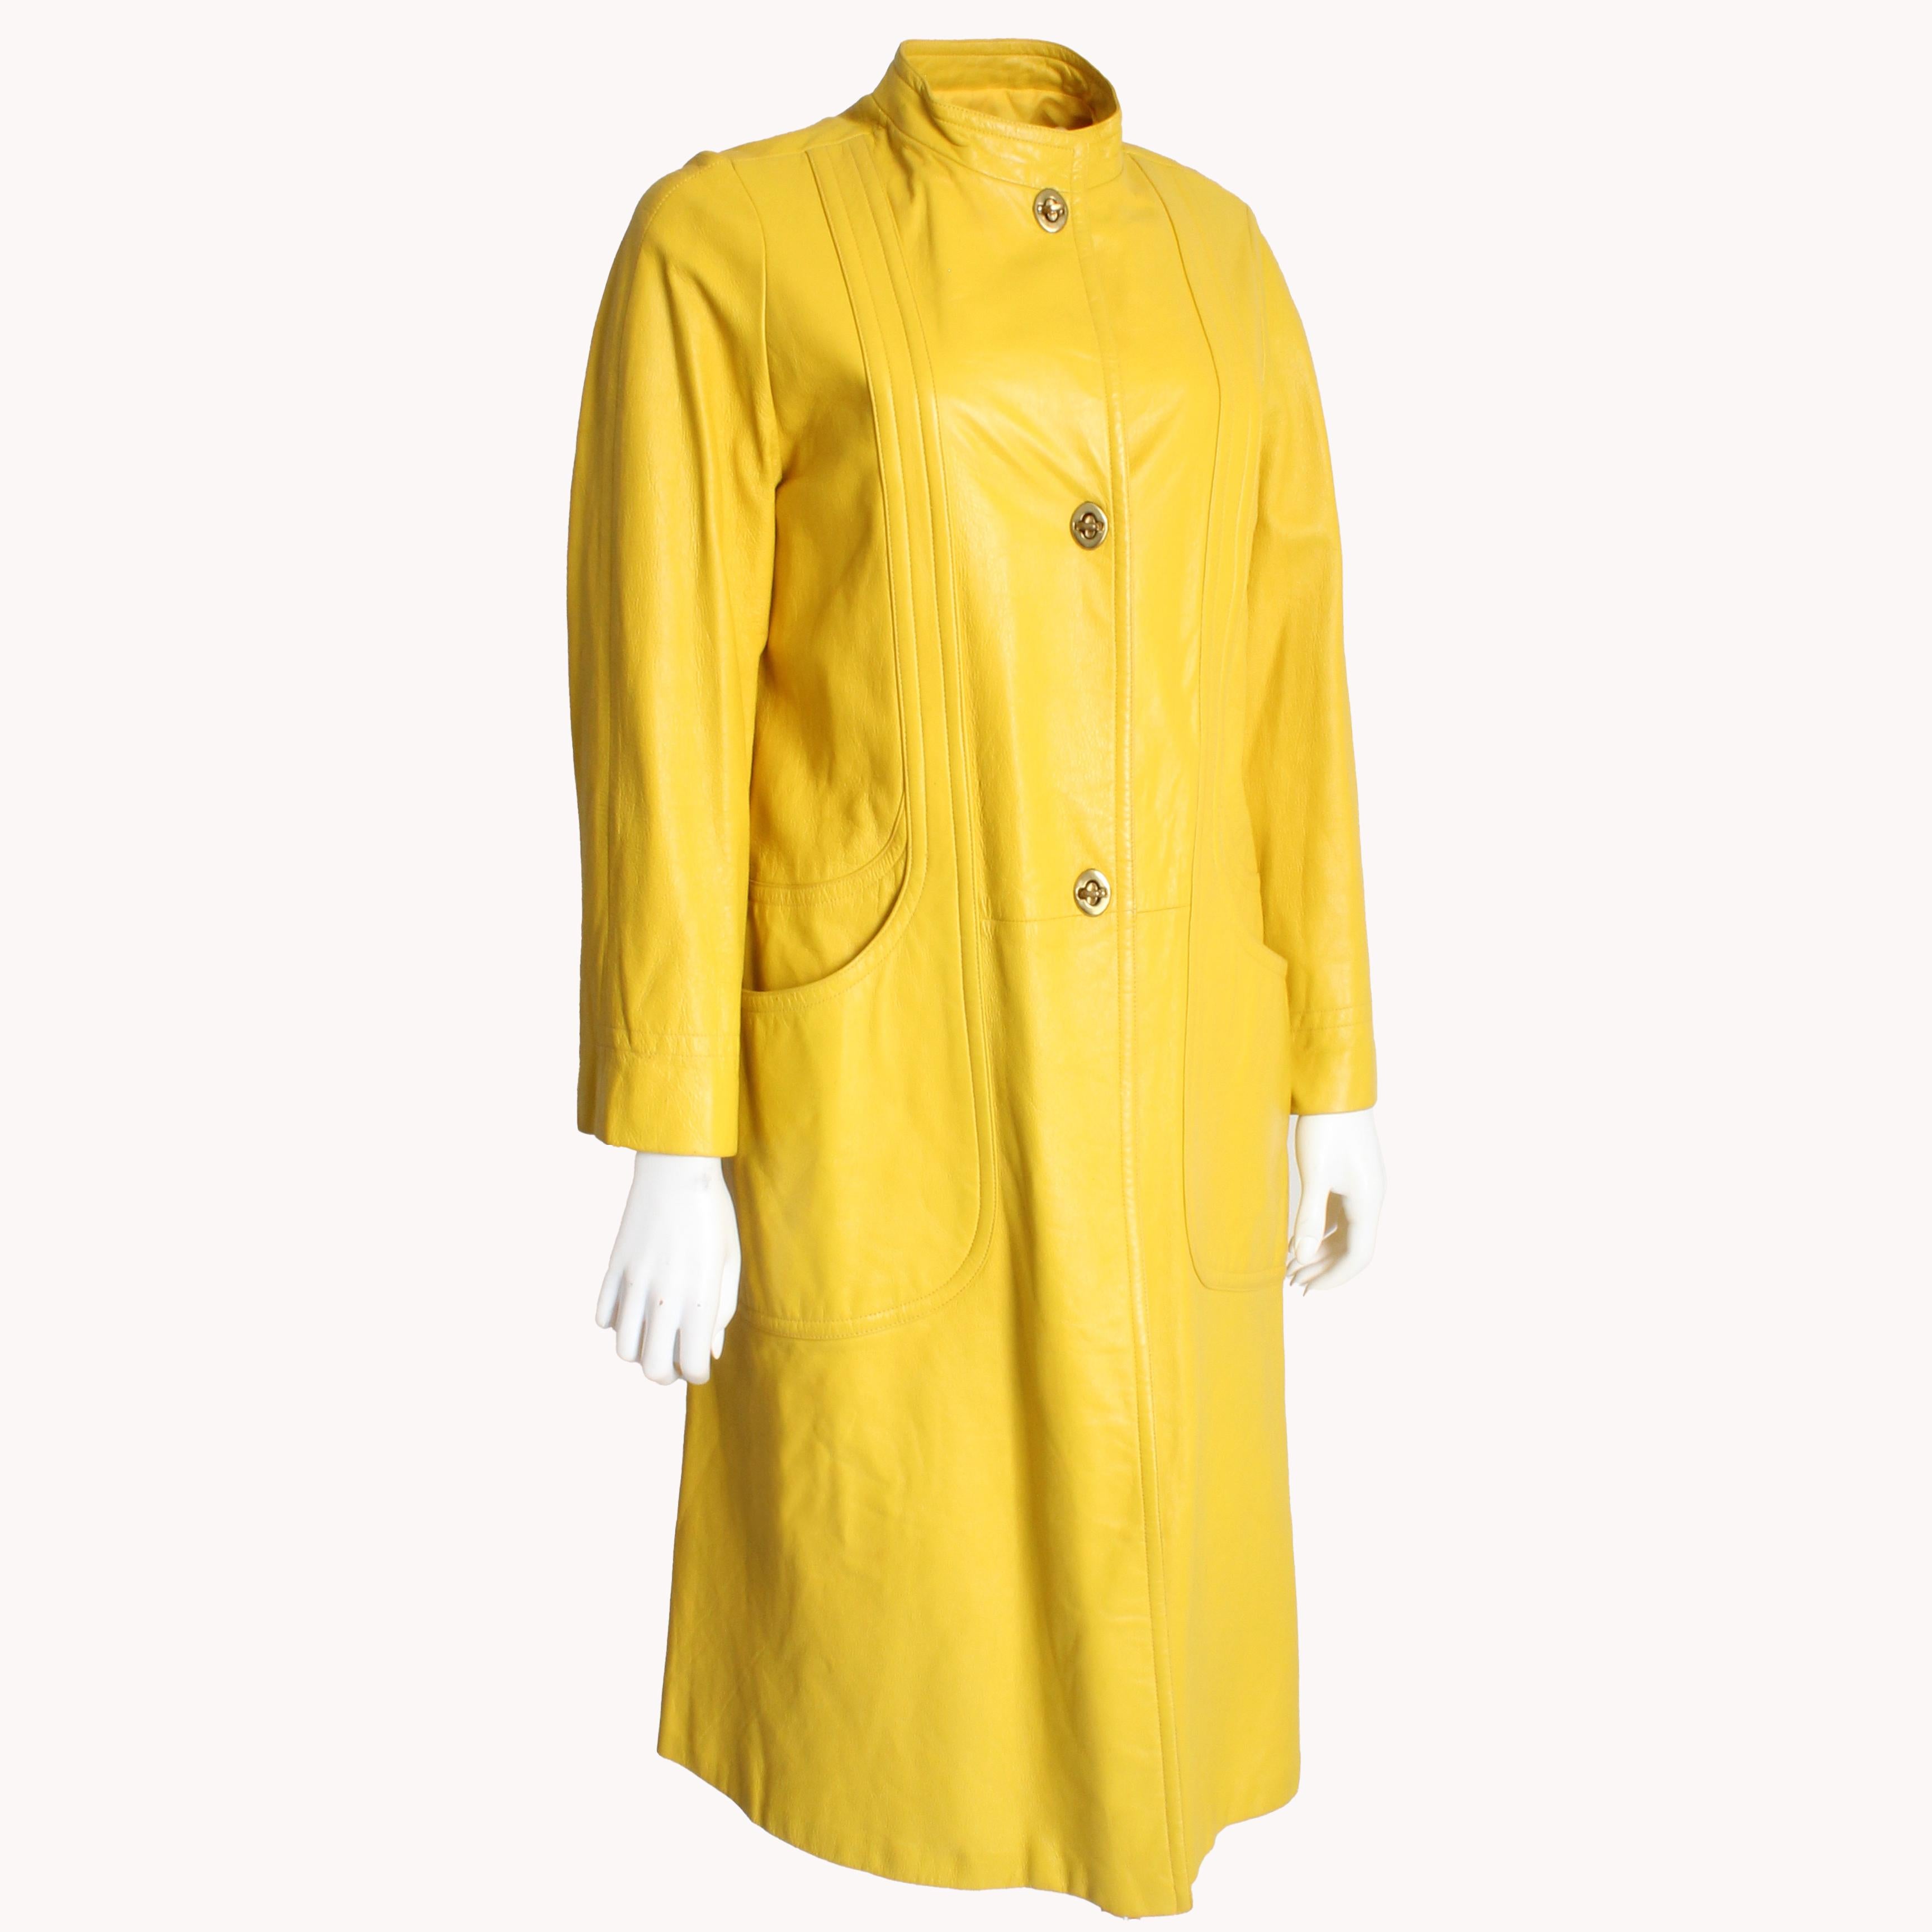 Authentic, preowned, vintage yellow leather coat by Bonnie Cashin for Sills, most likely in the 1960s.  Made from brilliant yellow leather, it features brass turn lock fasteners and half-moon pockets at each hip!  Incredibly chic, this eye catching